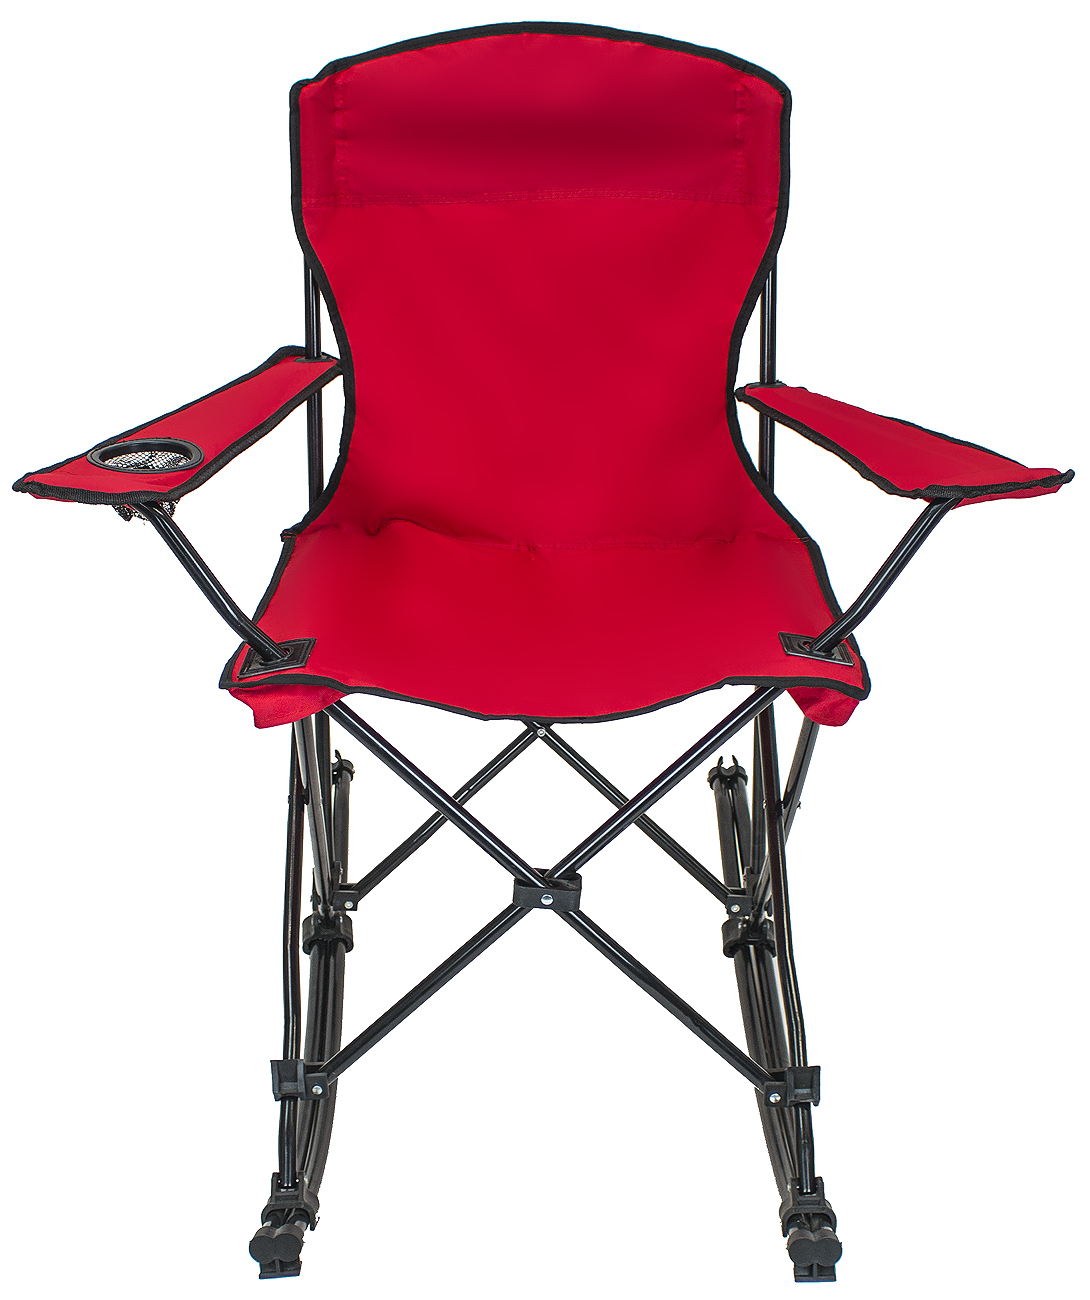 Sorbus Quad Rocking Chair with Cup Holder Cooler, Foldable Frame, and Portable Carry Bag, Recliner Chair Great&nbsp;Outdoor Chair&nbsp;for Camping, Sporting Events, Travel, Backyard, Patio, etc - image 3 of 13